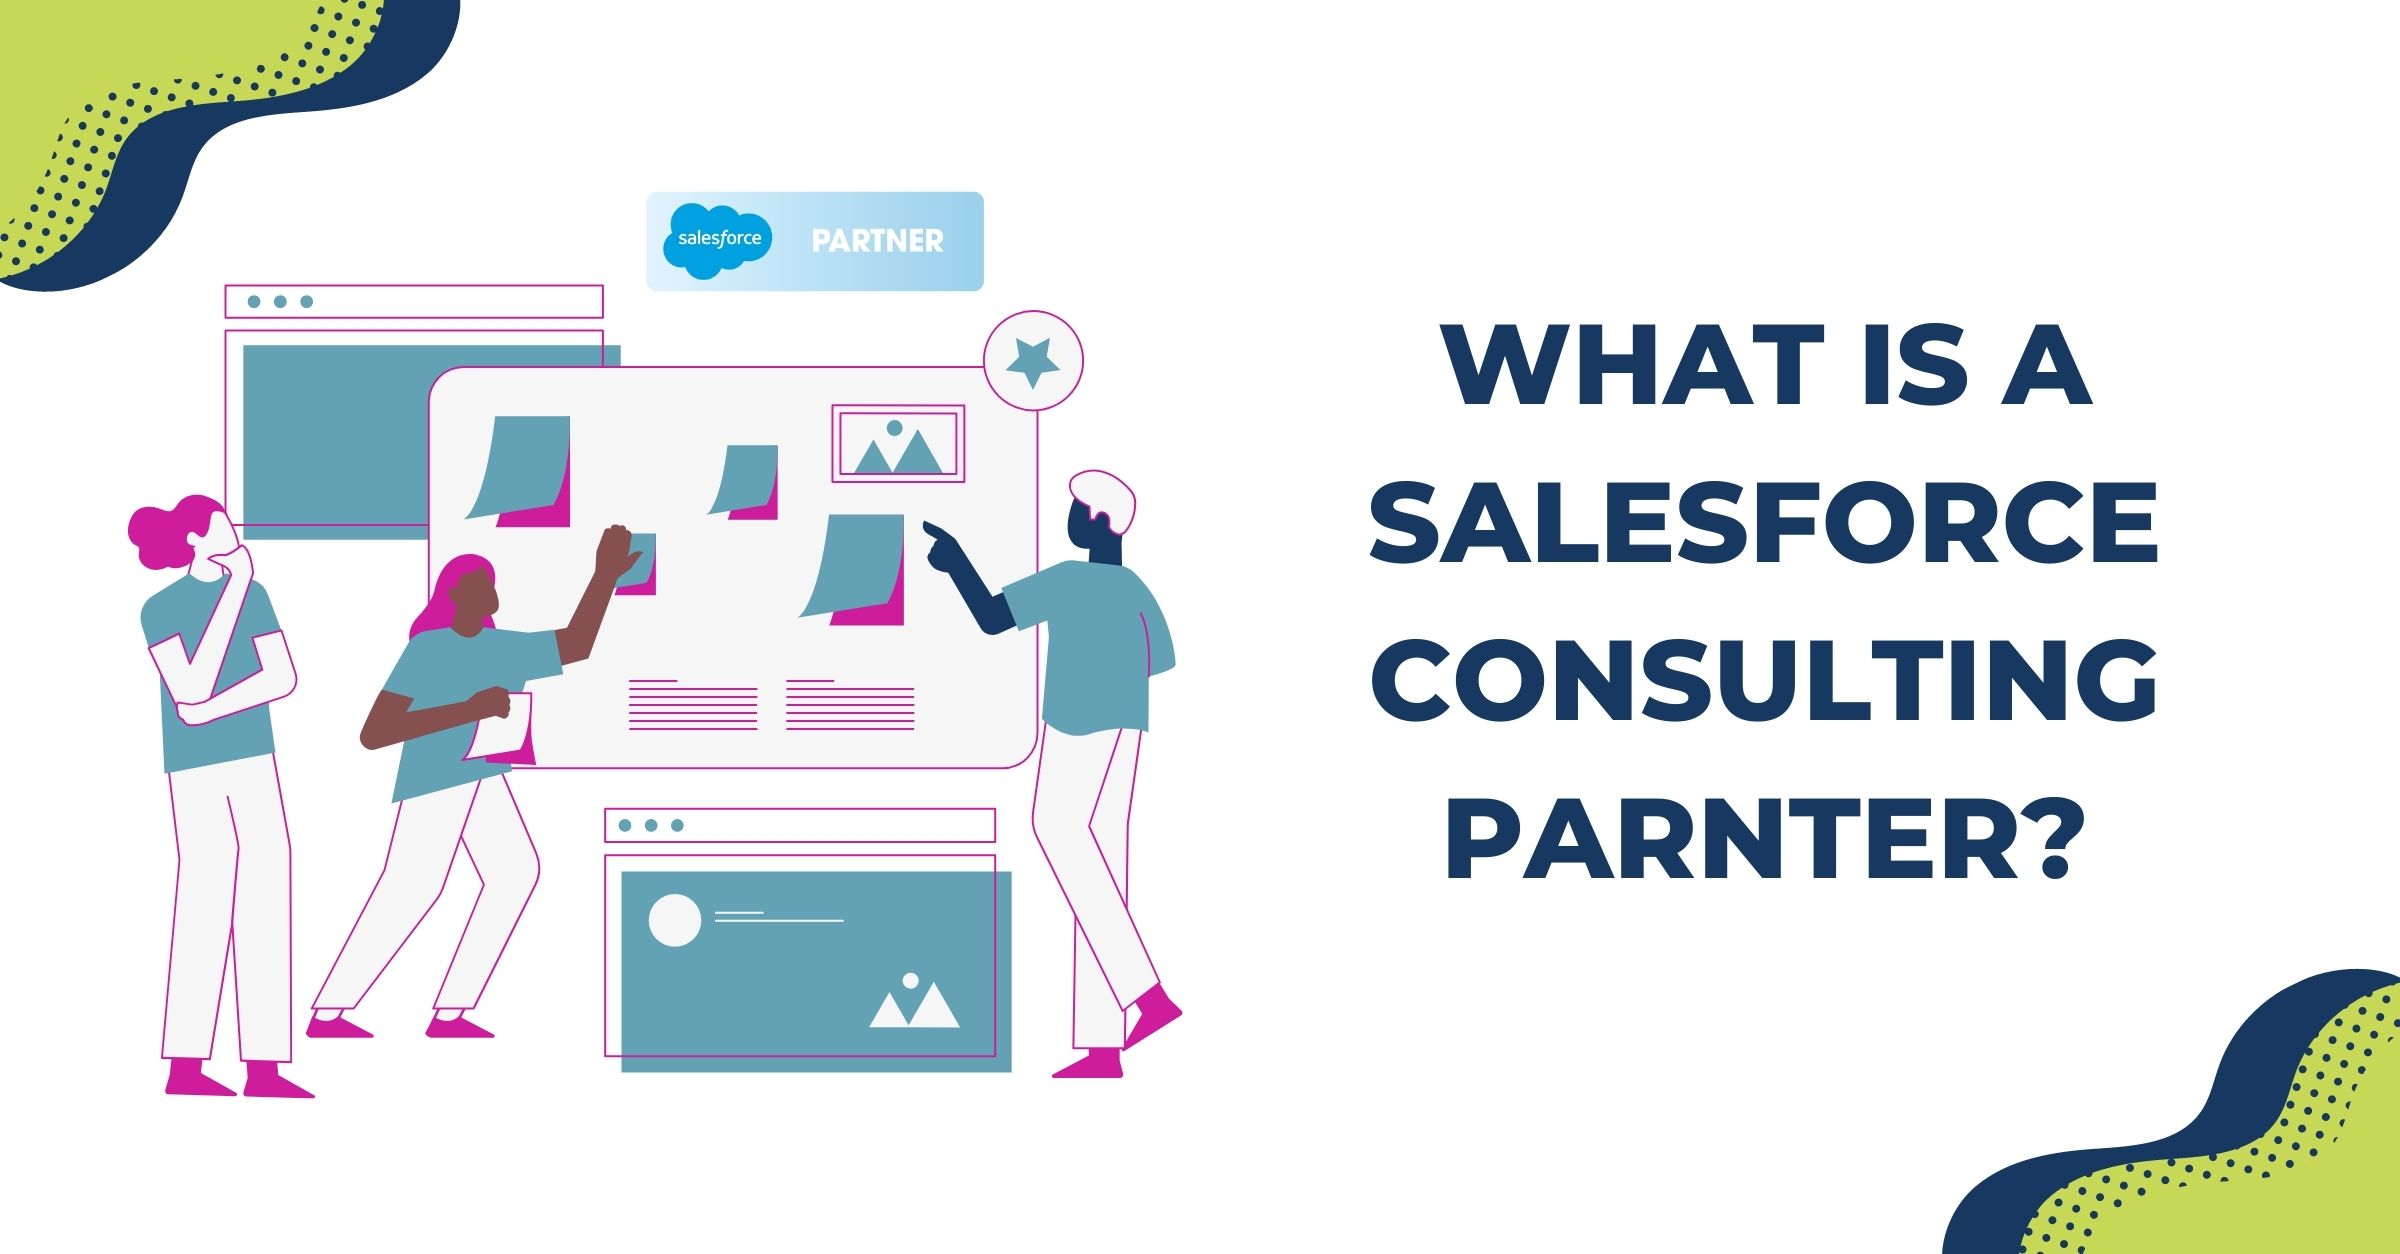 Working with a Salesforce consulting partner